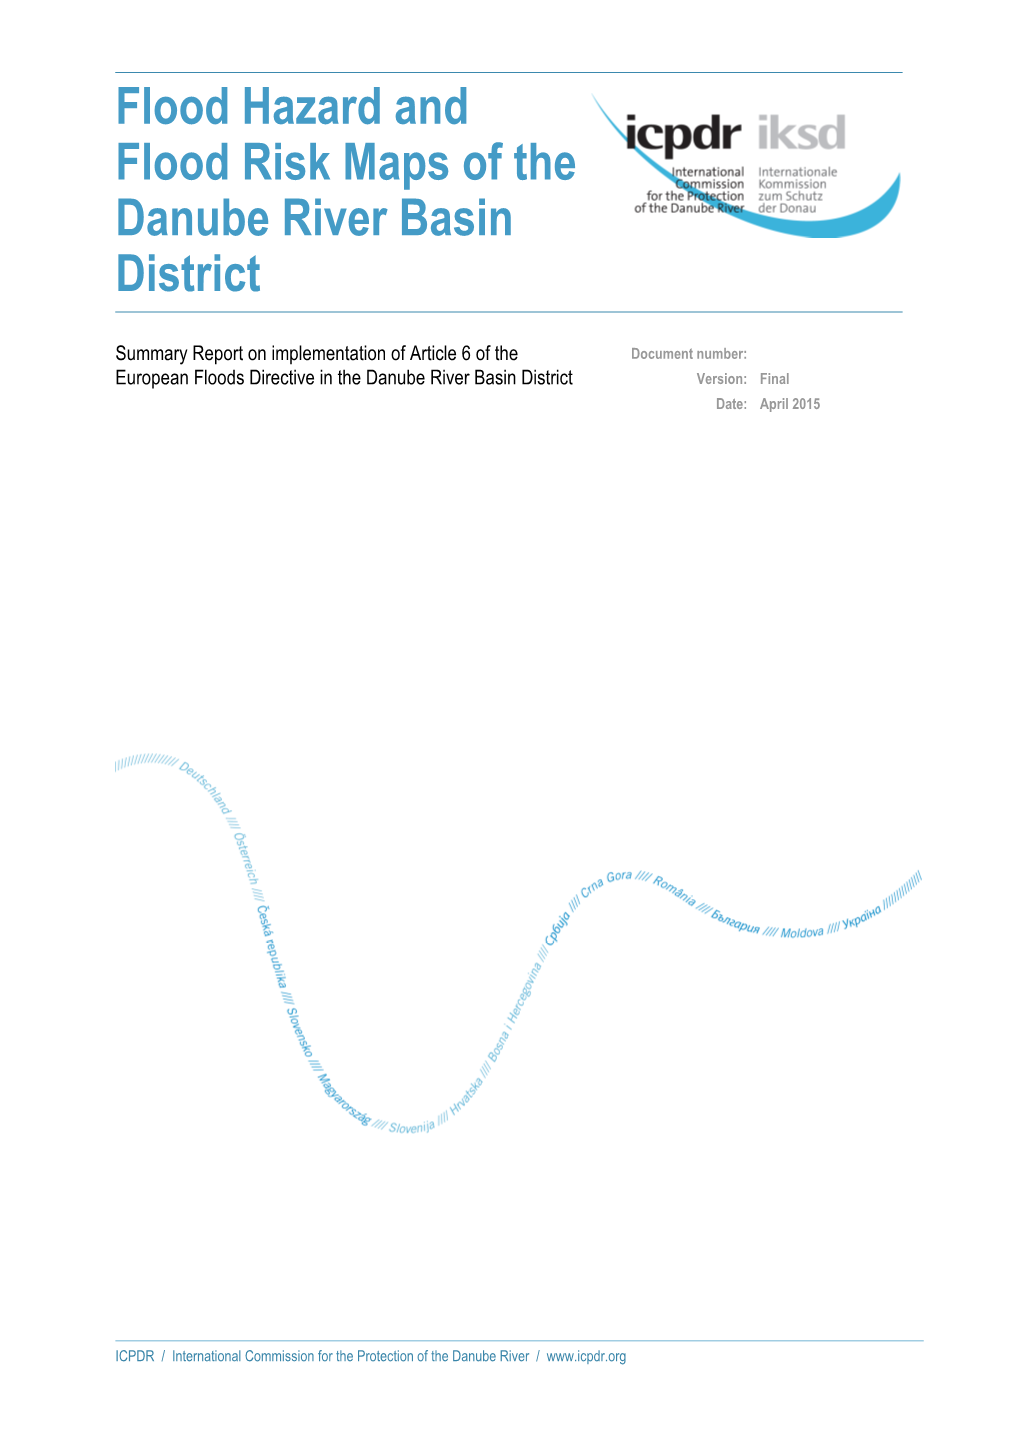 Flood Hazard and Flood Risk Maps of the Danube River Basin District